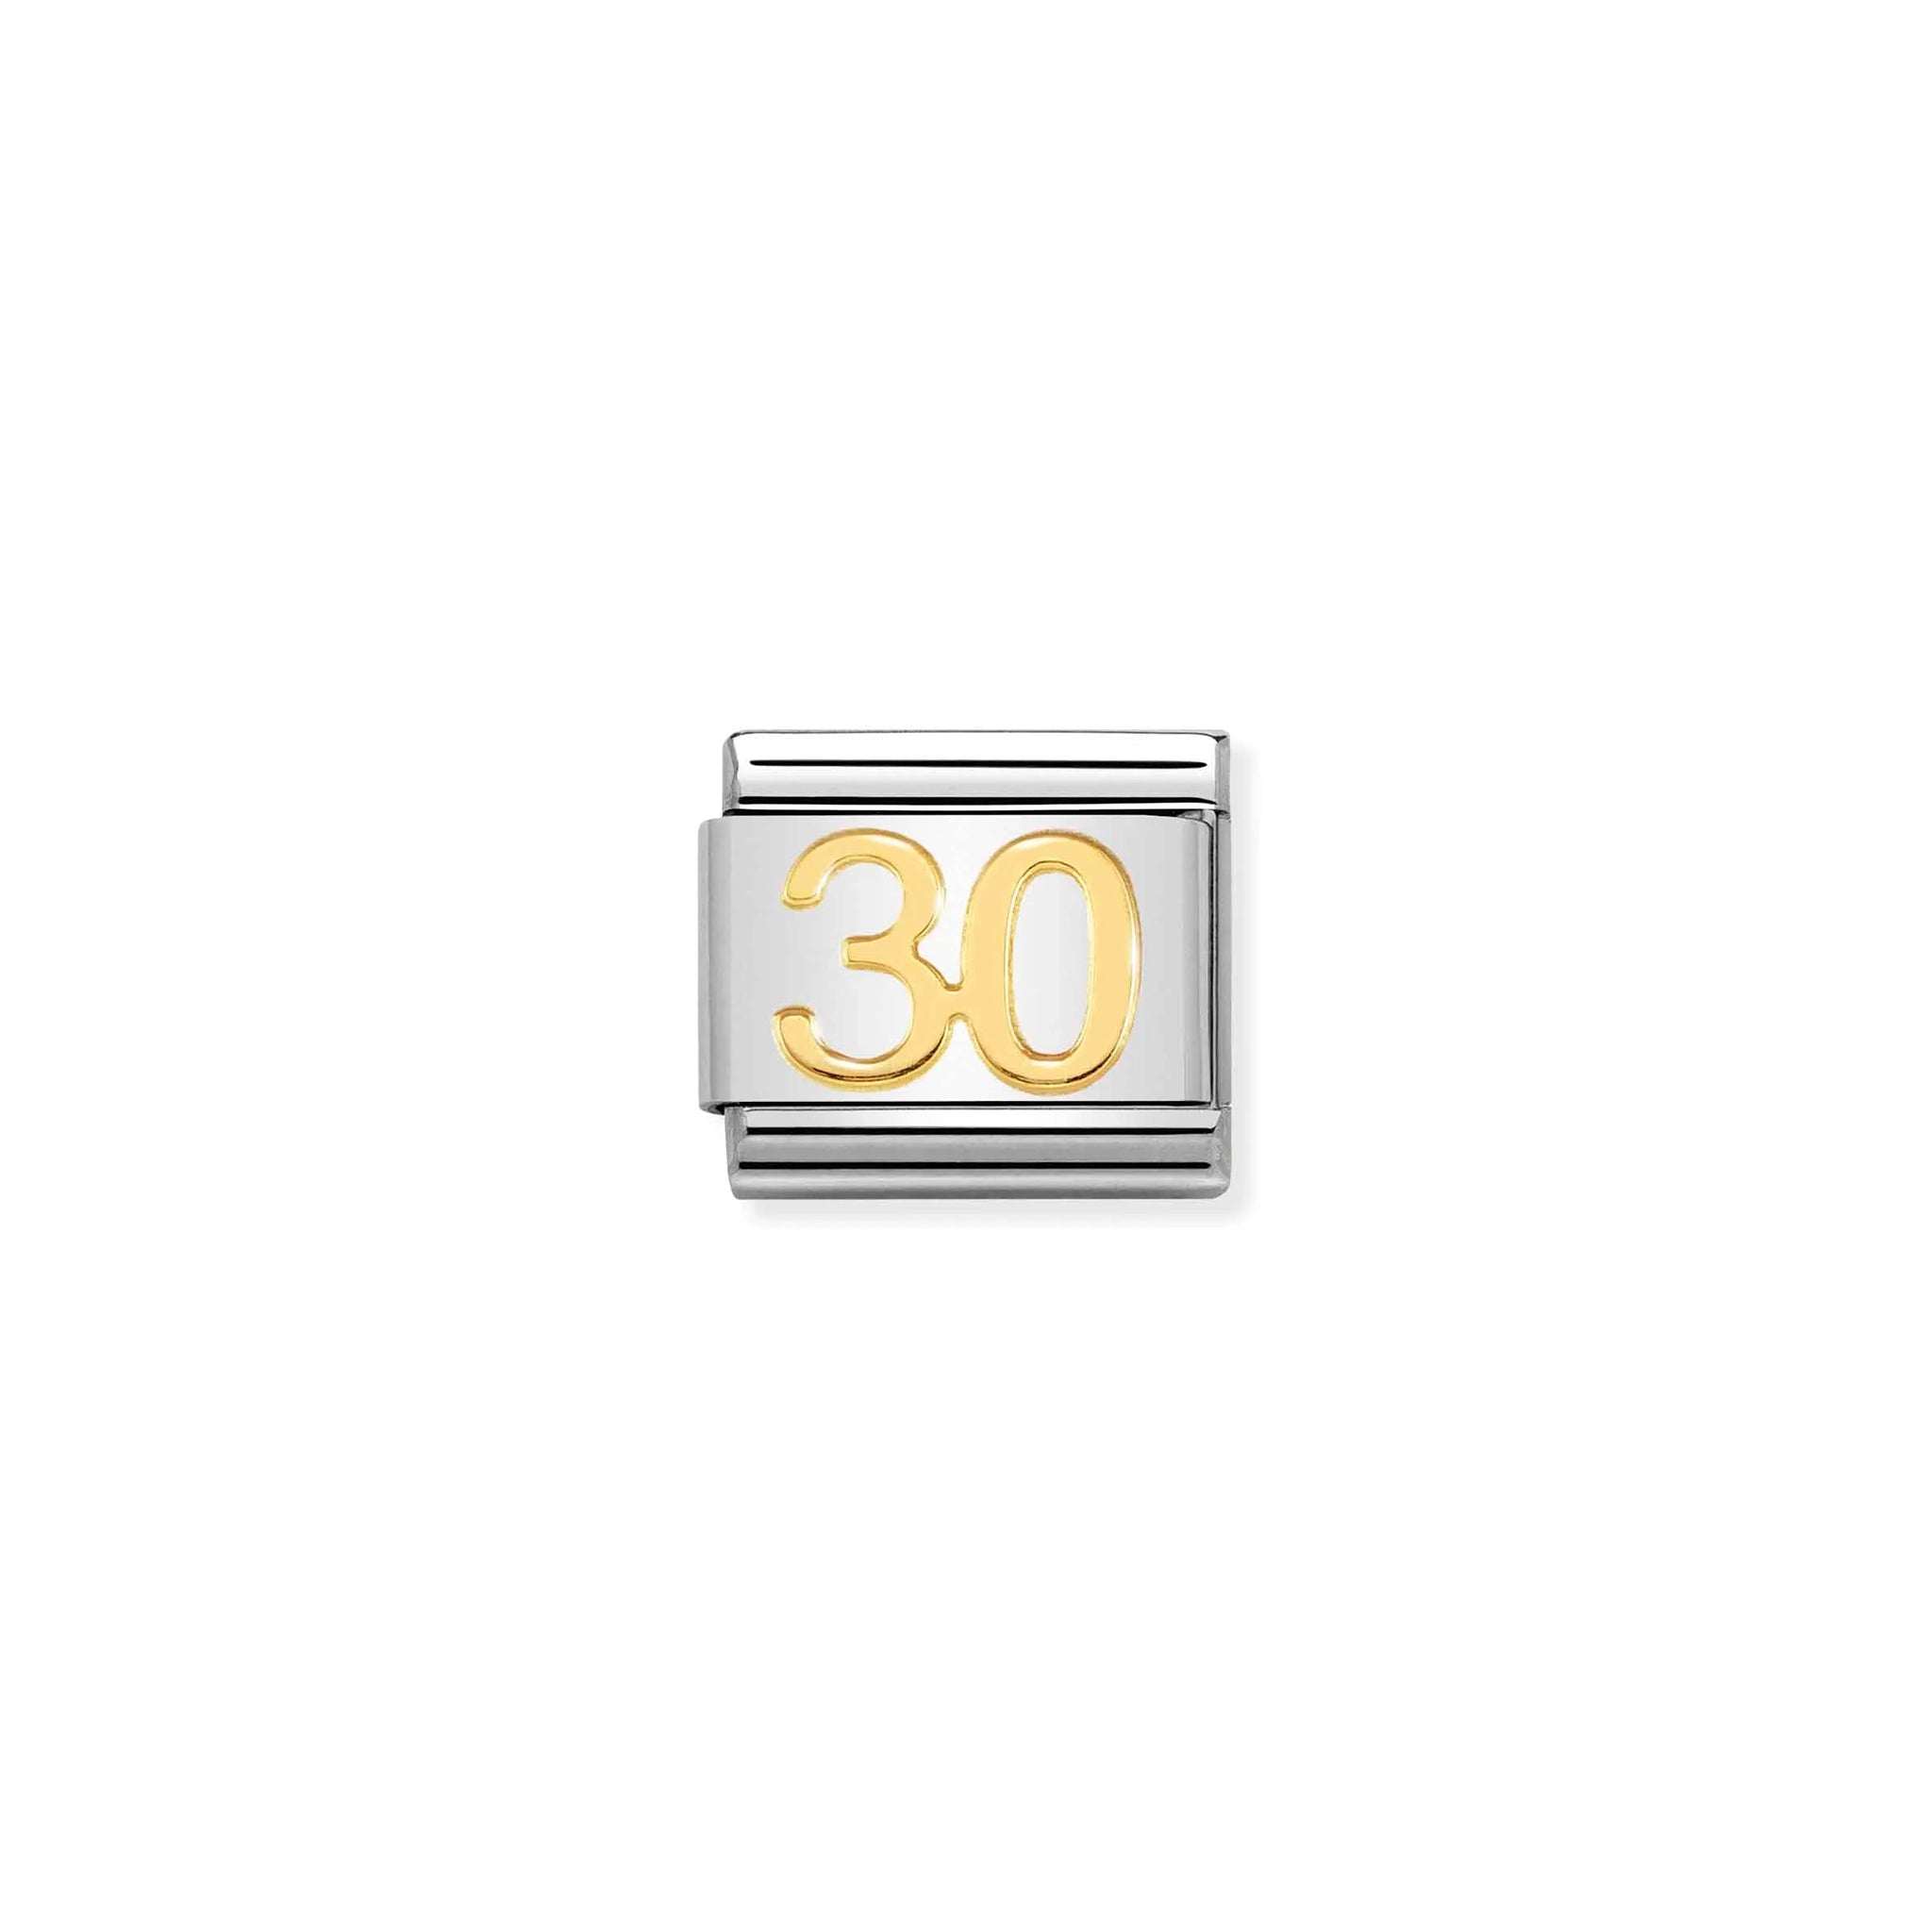 A Nomination charm link featuring a plain gold number 30